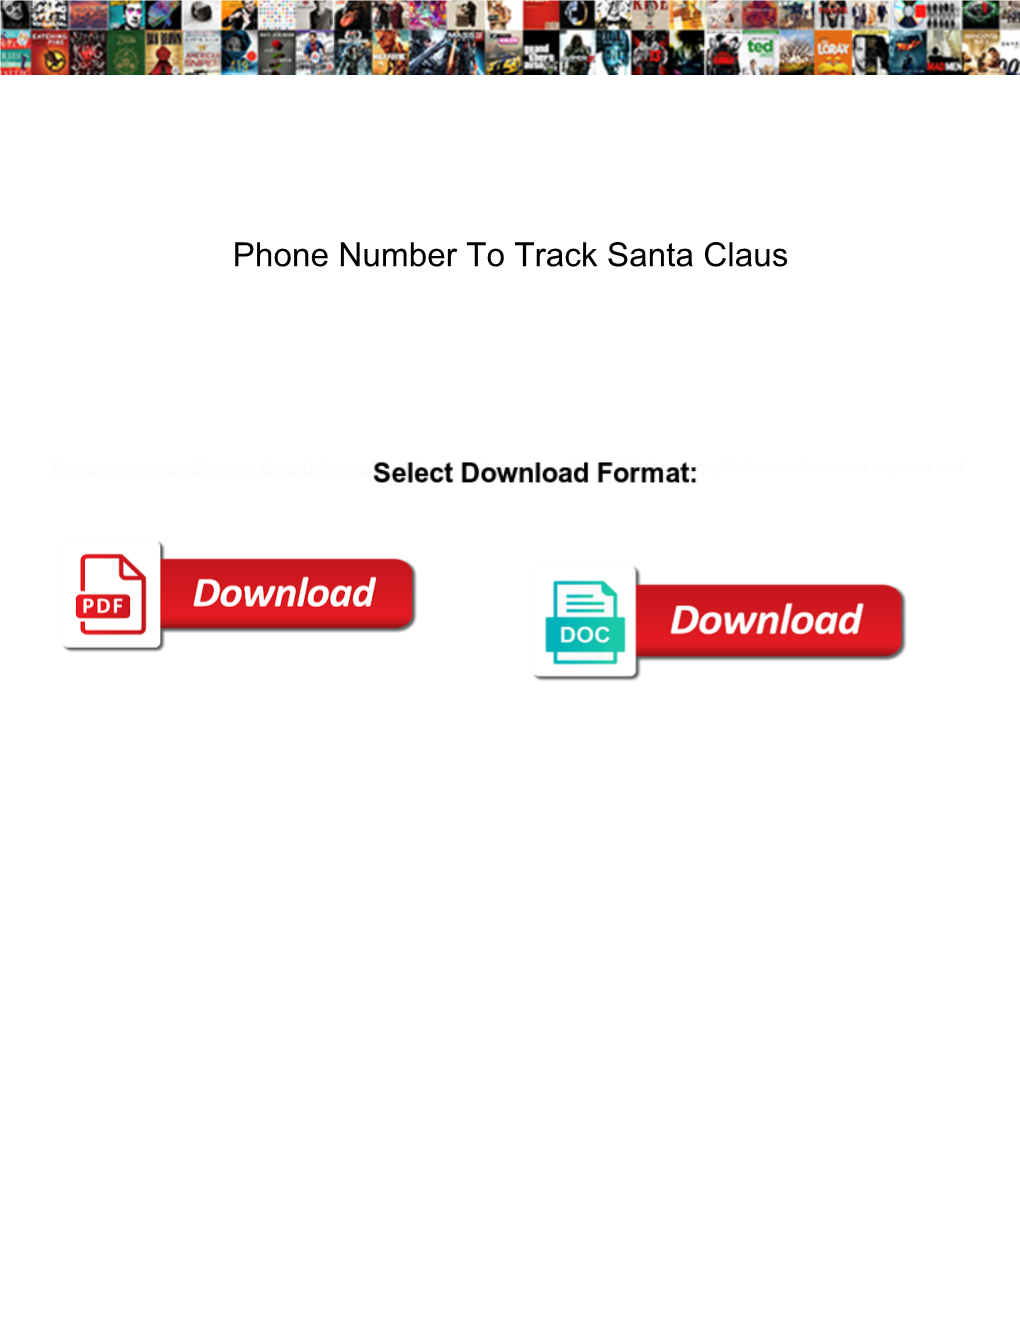 Phone Number to Track Santa Claus